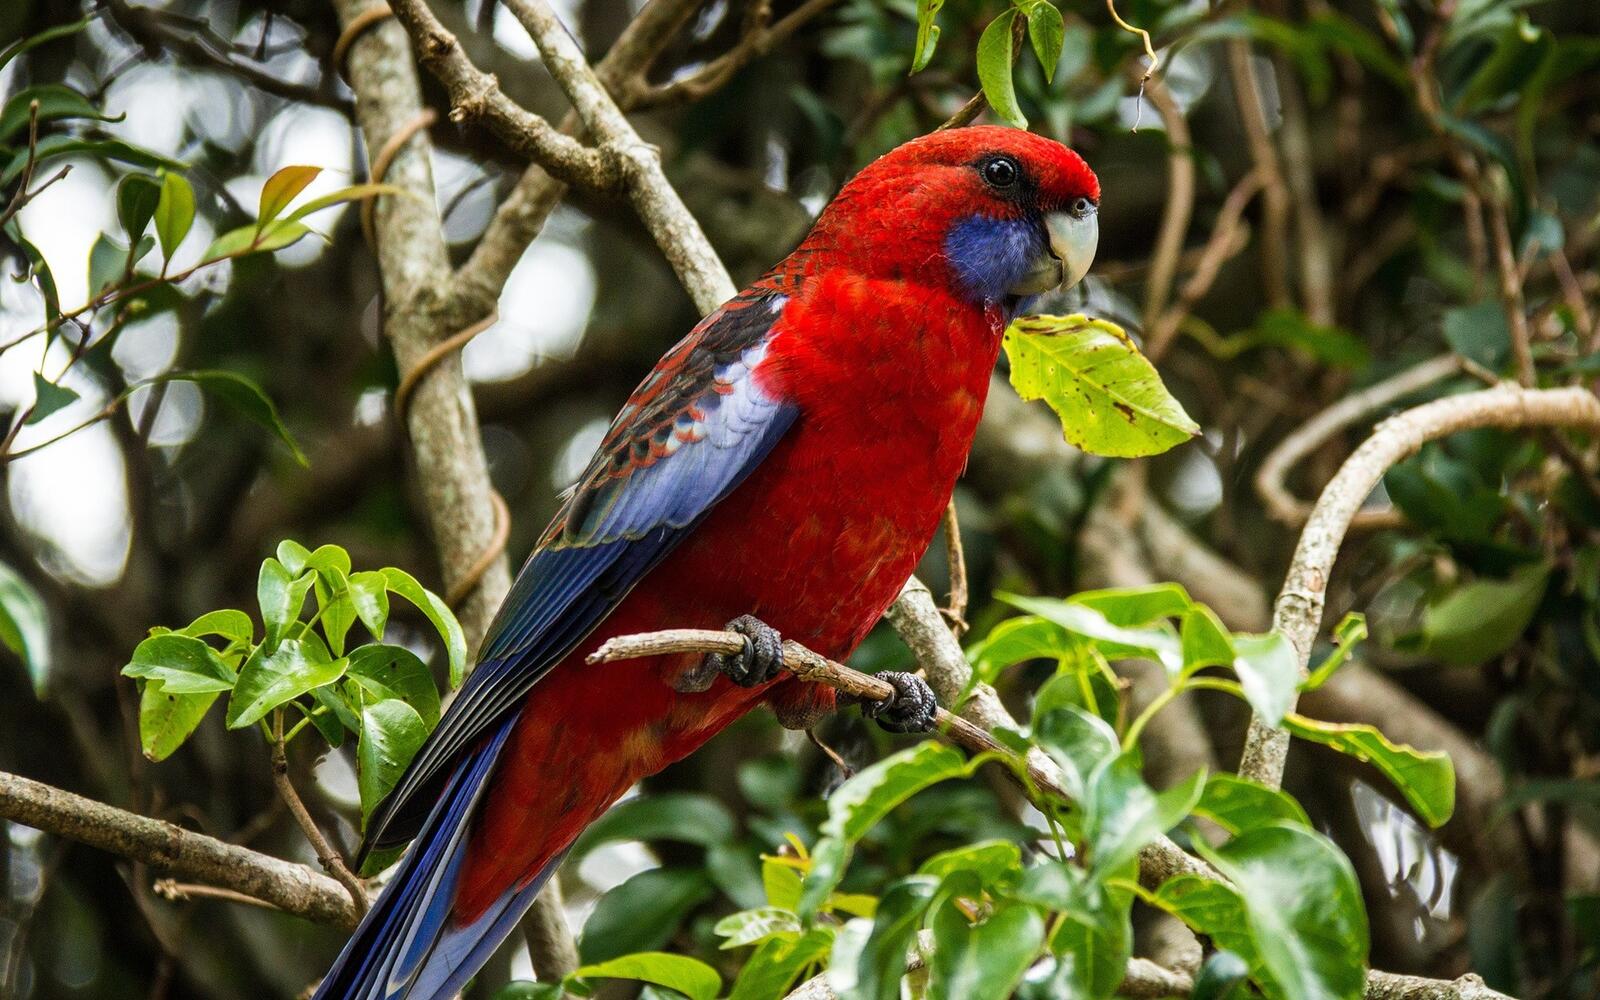 A red parrot sits on a tree branch